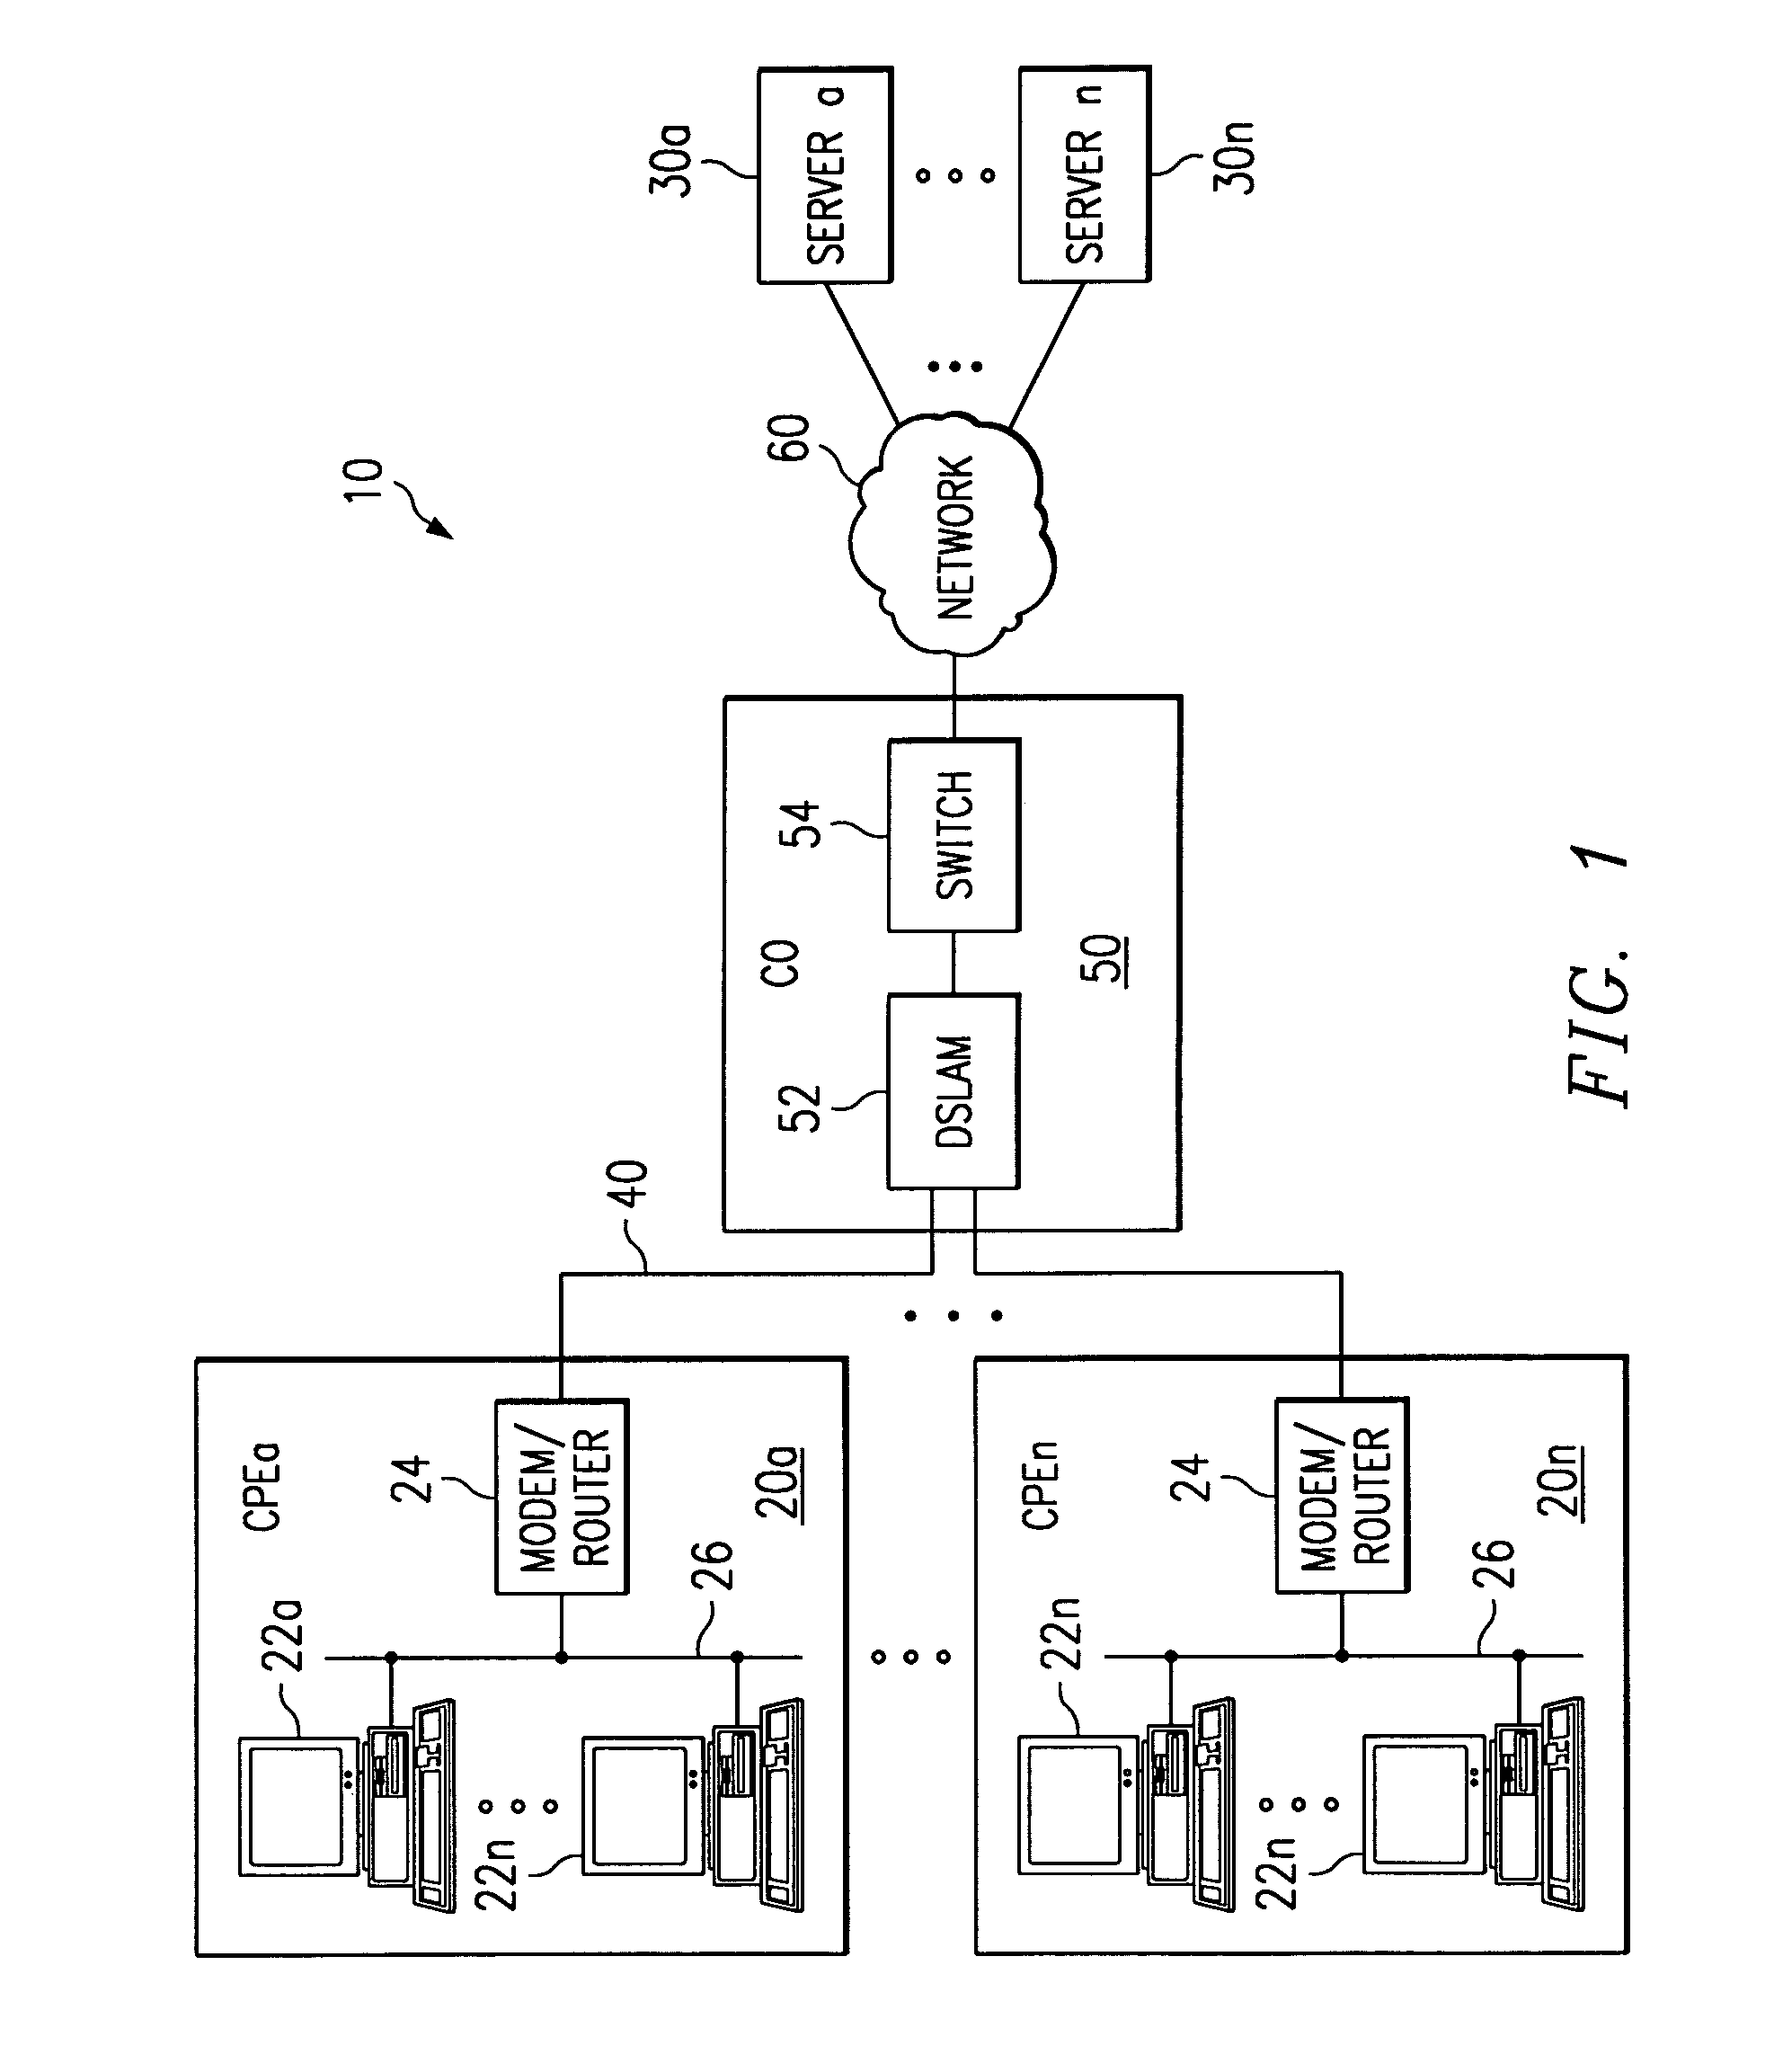 Method and apparatus for automated assistance in configuring customer premises equipment